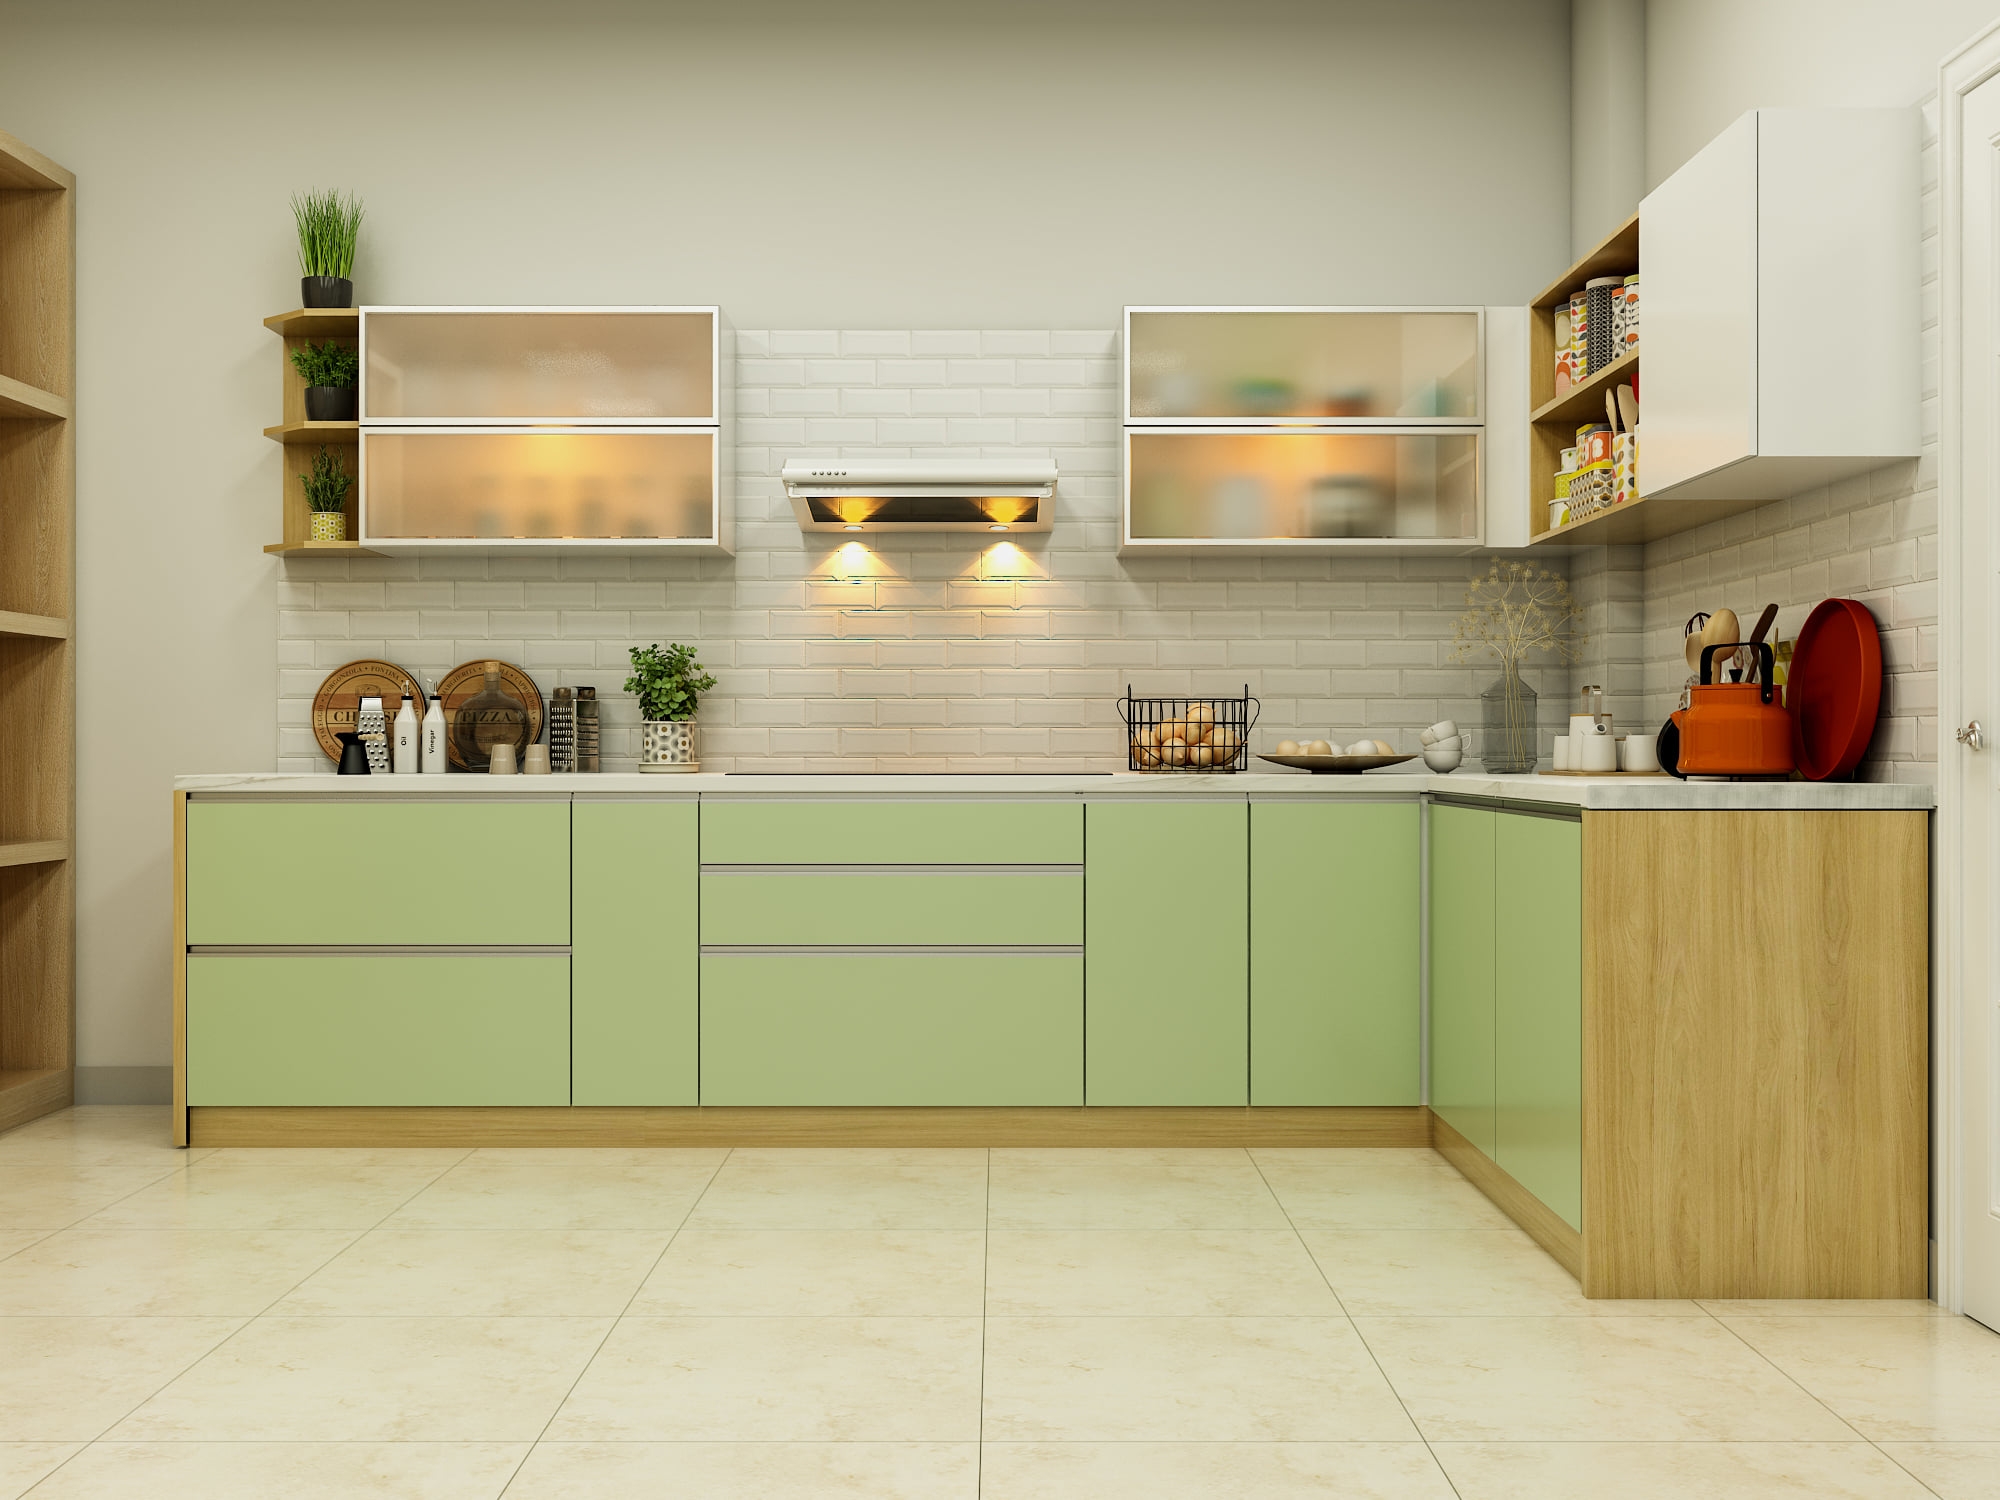 Why You Need To Select a Modular Kitchen Design Generation Easy Jet